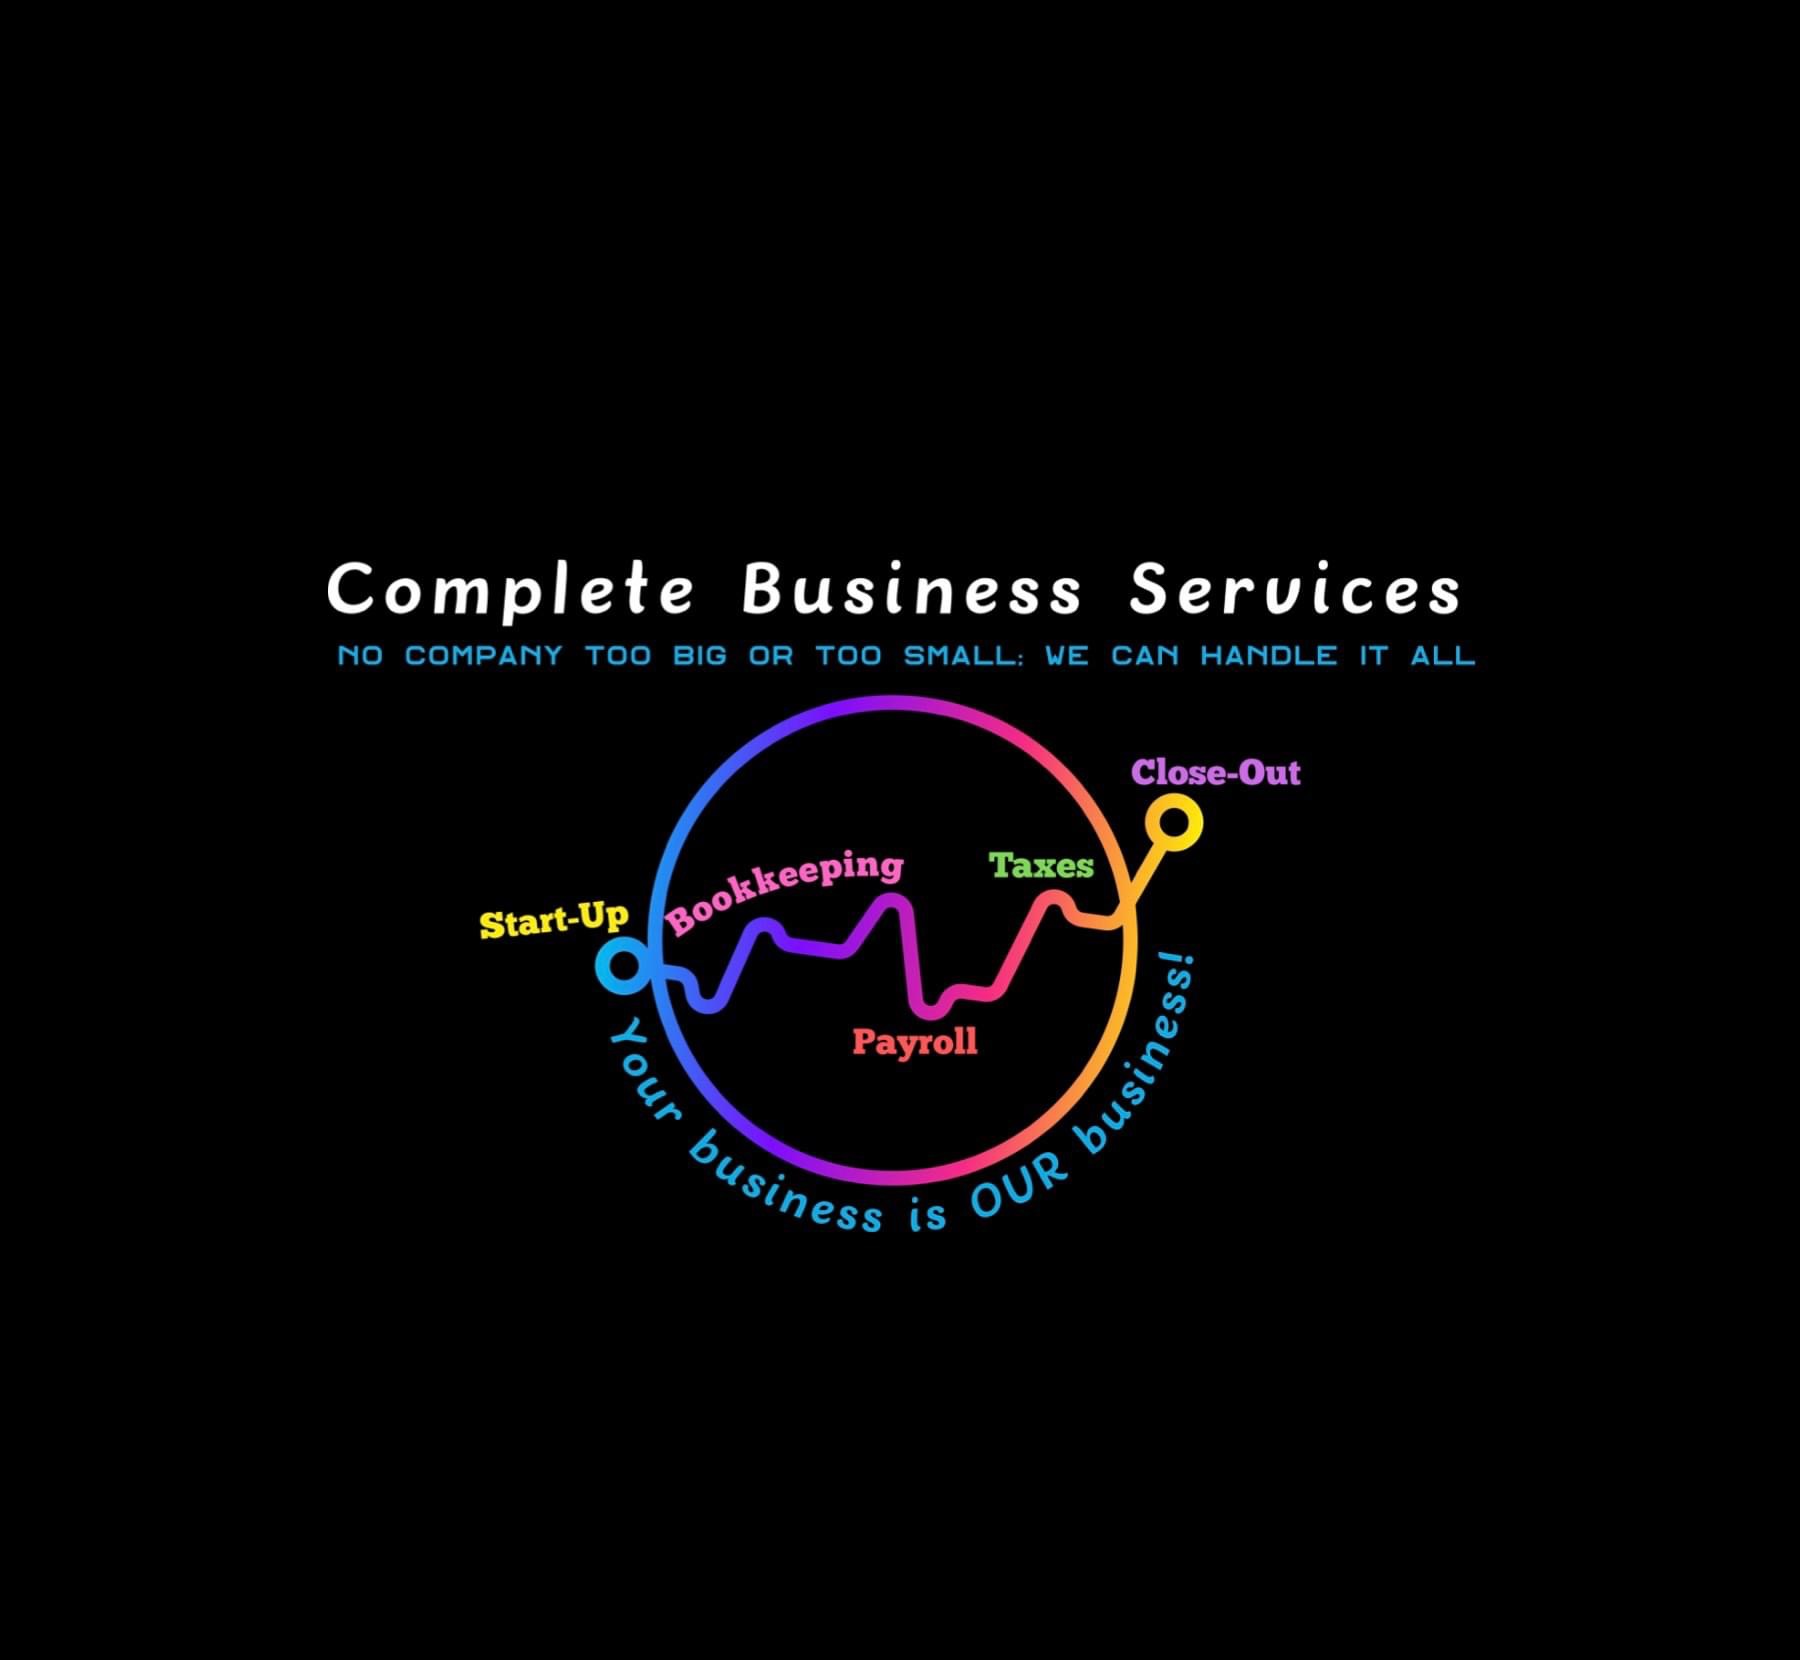 Complete Business Services LLC 8441 US-175, Kemp Texas 75143